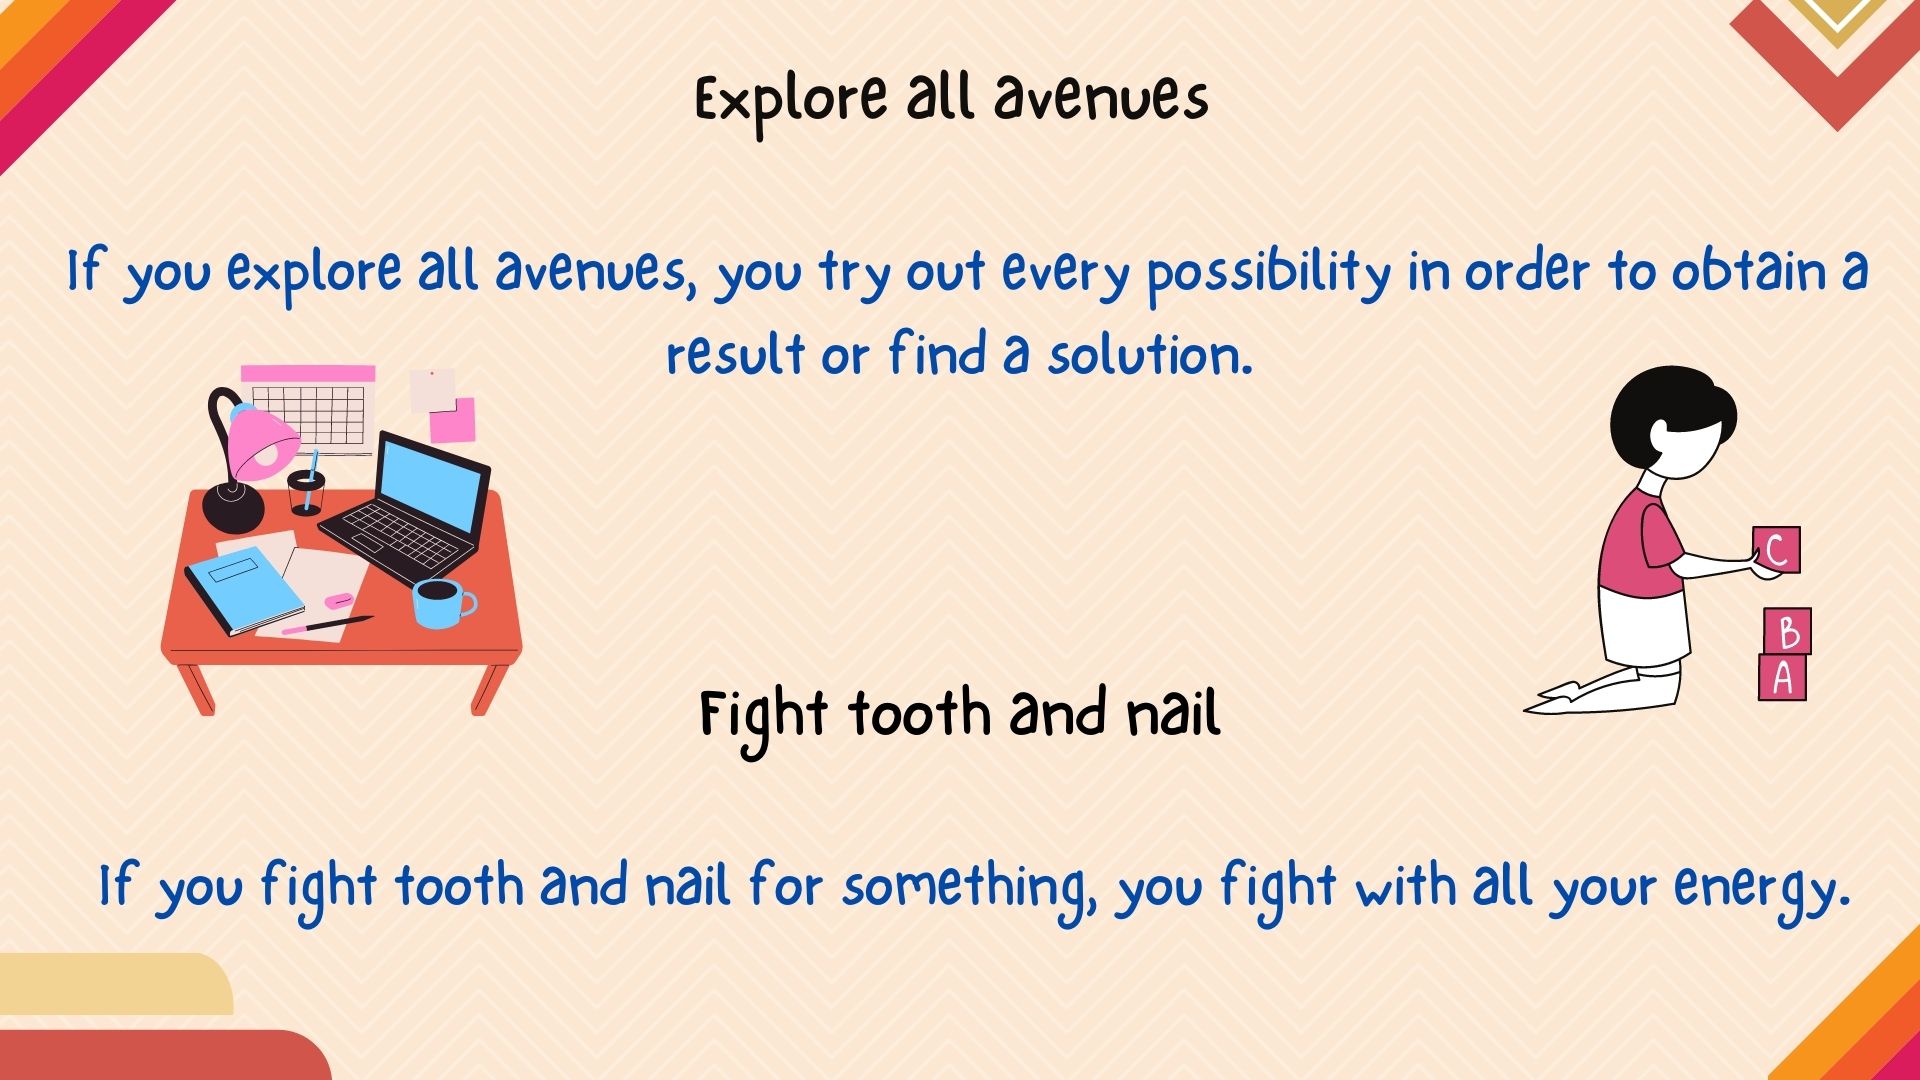 fight tooth and nail -Idioms